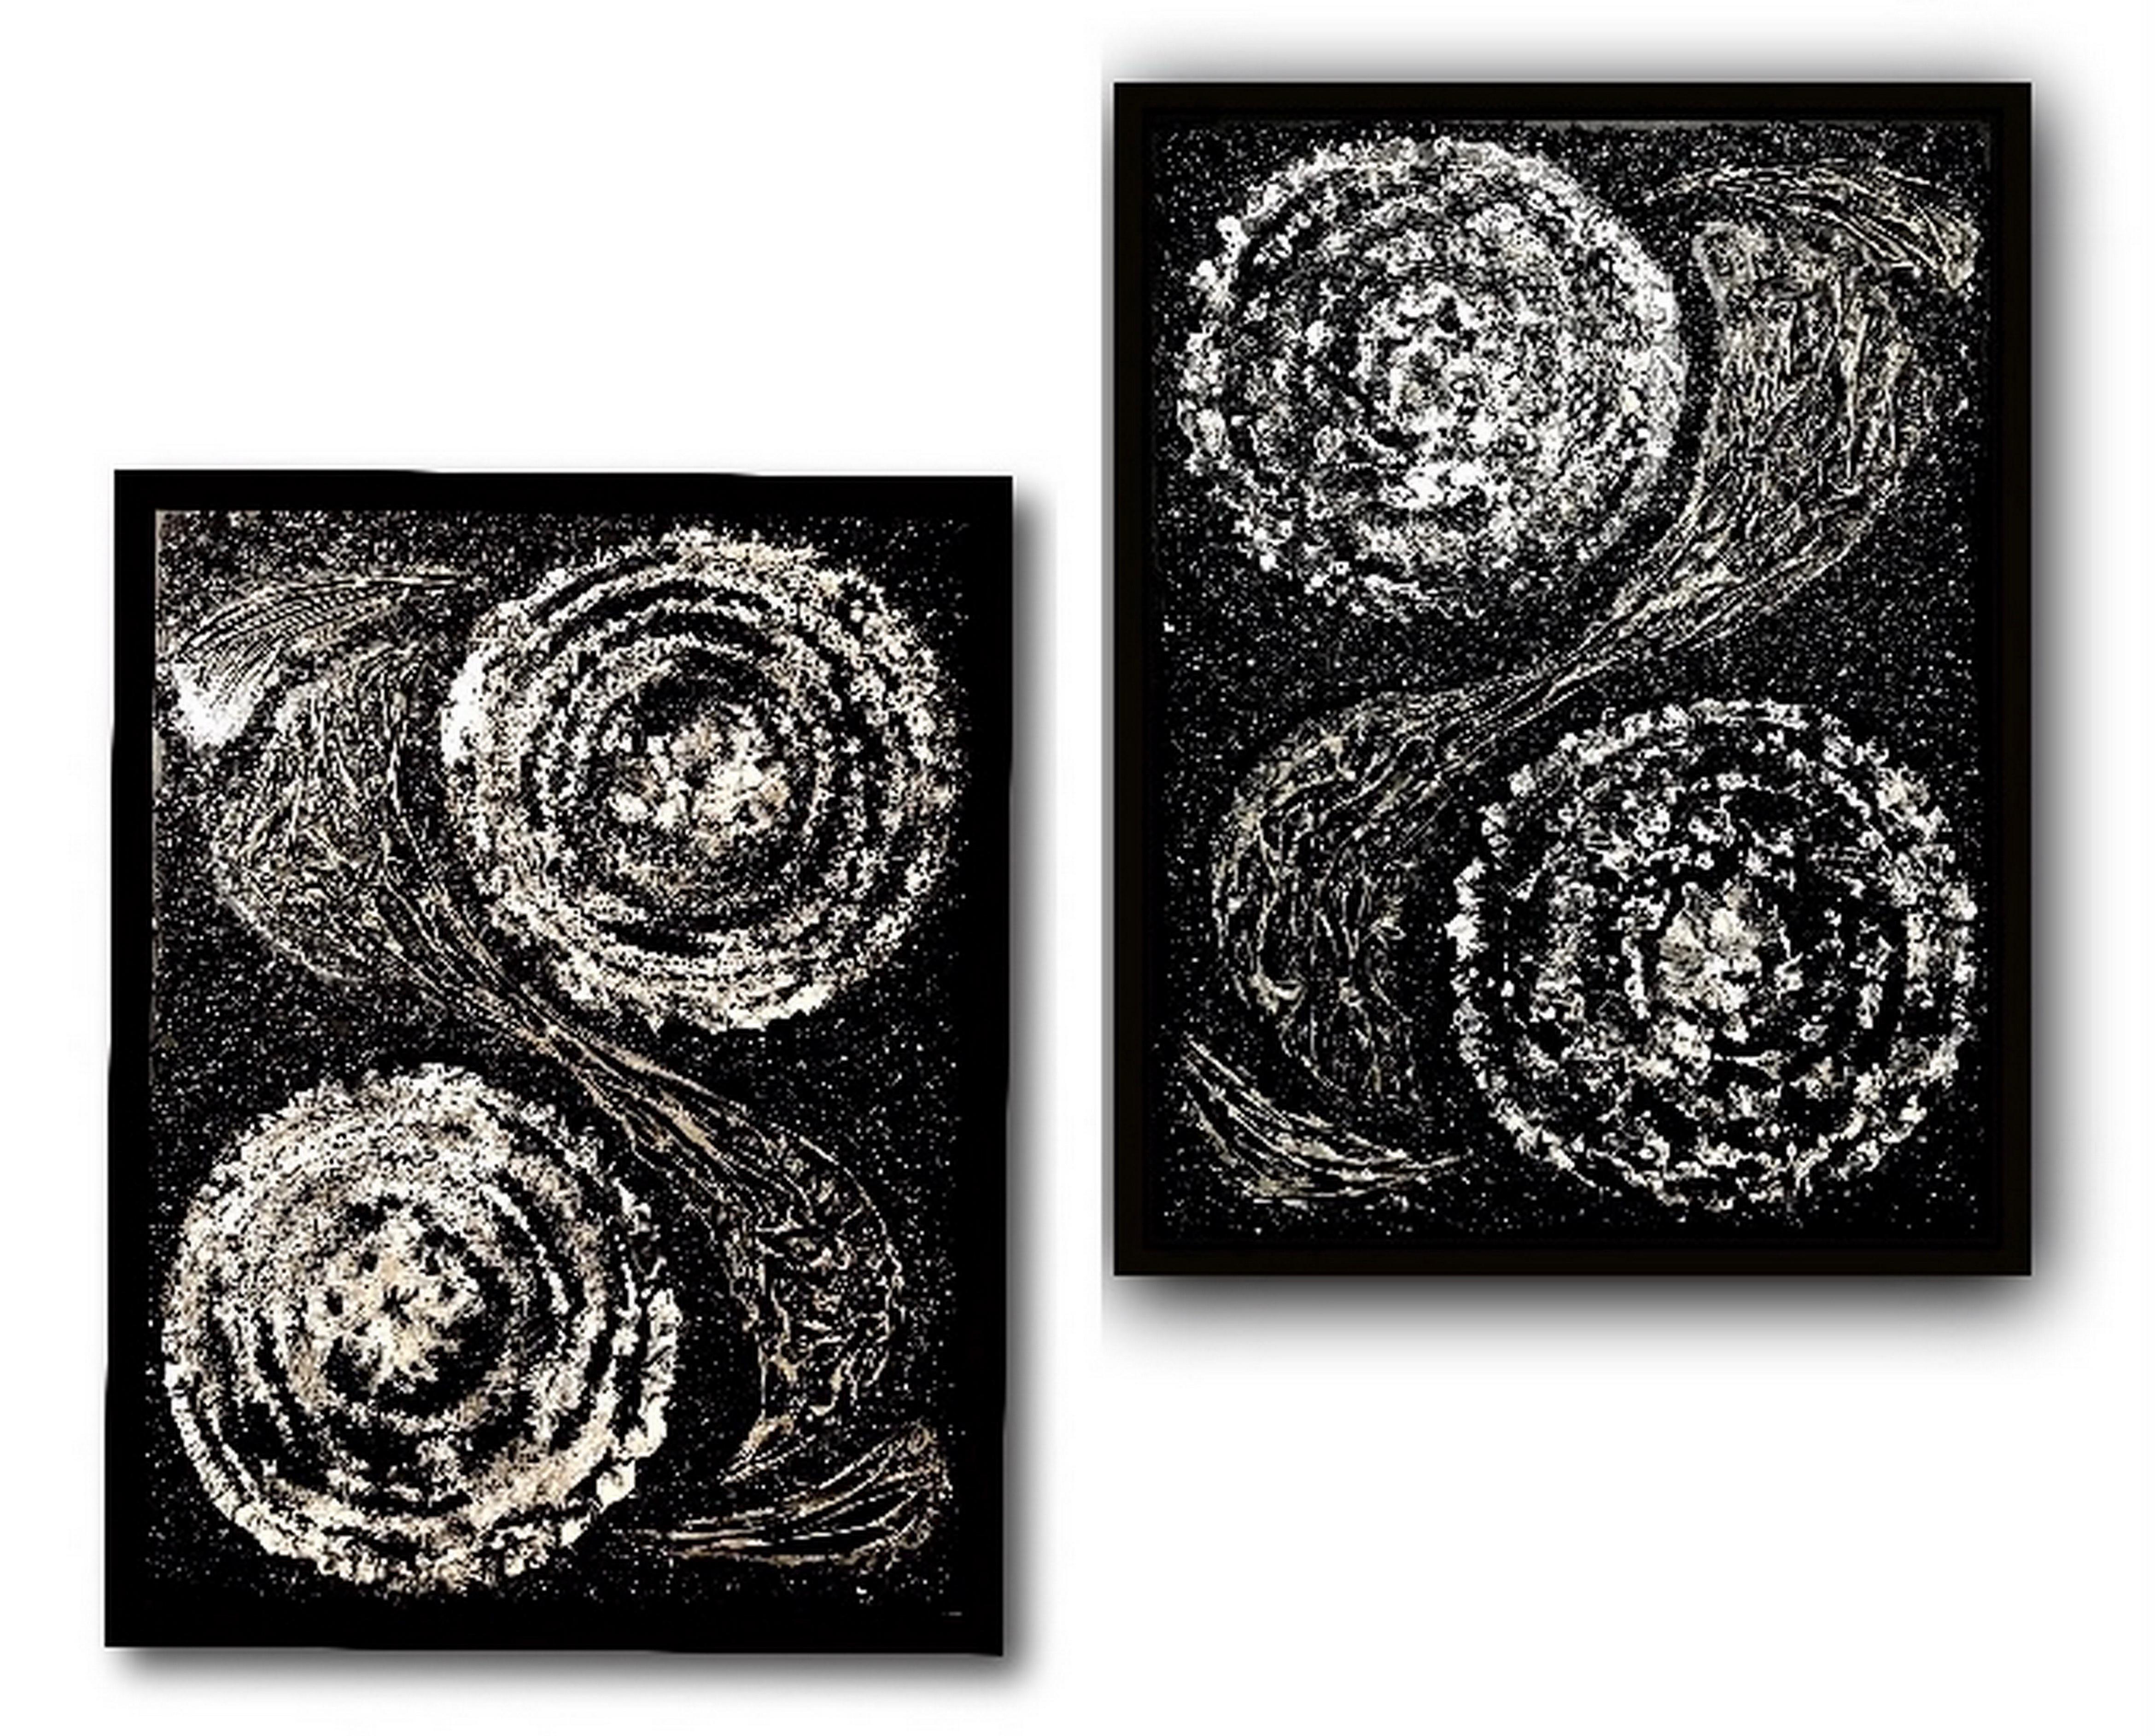 Set of 2 Wall Sculpture. Diptych. Collage Mixed Media on canvas, black & white. - Abstract Expressionist Mixed Media Art by Vik Schroeder 